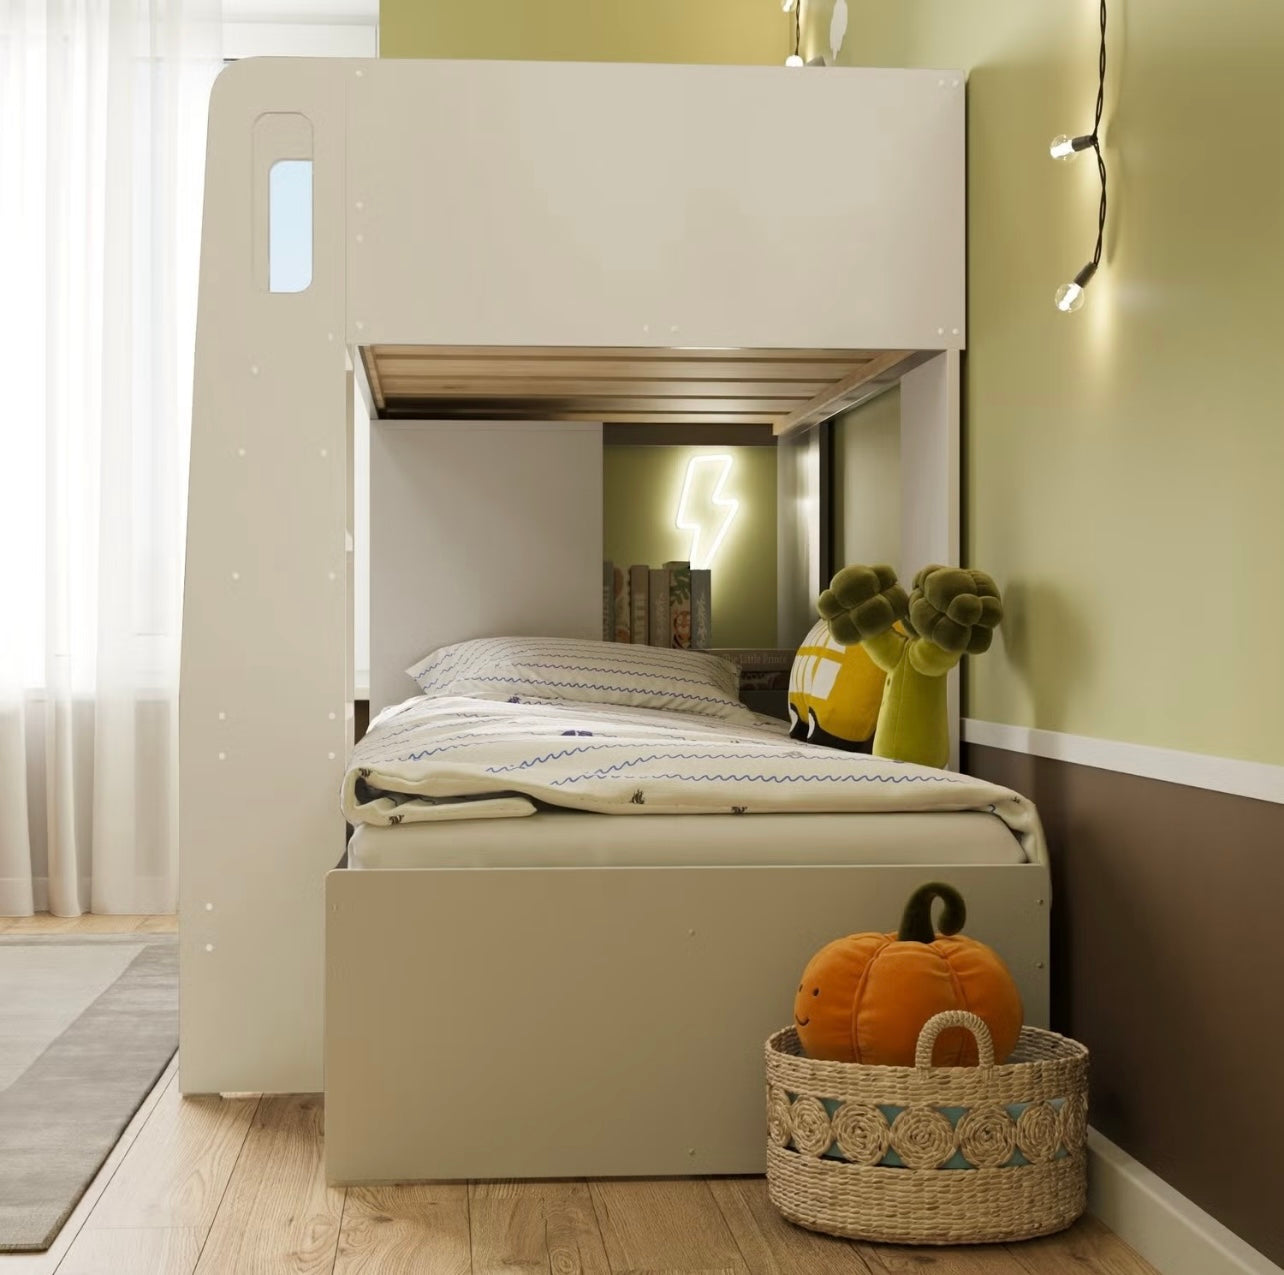 Kids Bunk Bed with Storage and Shelf